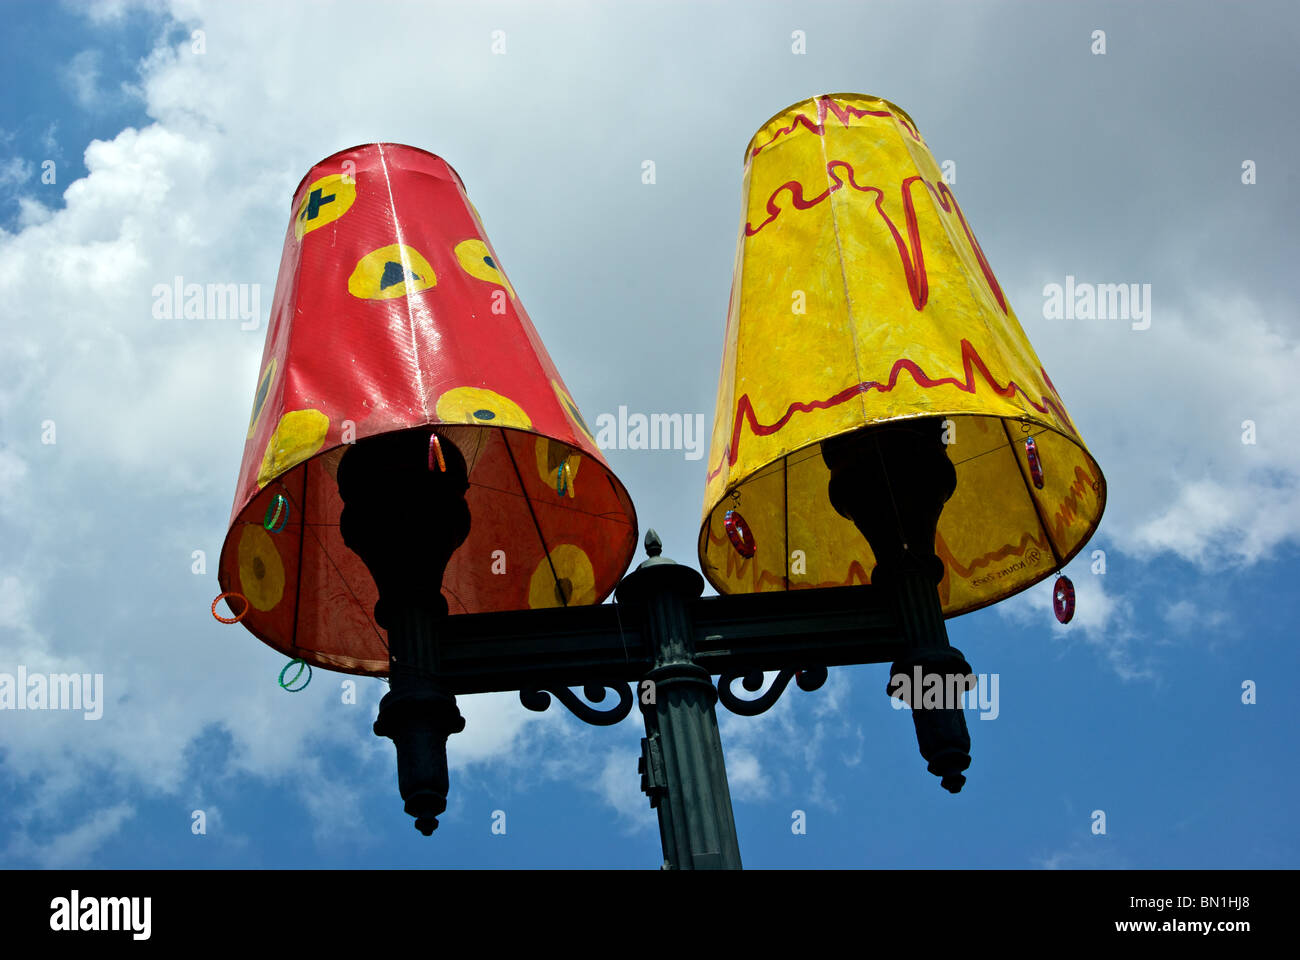 Colorful lamp shades on street lighting in downtown Shreveport LA Stock Photo